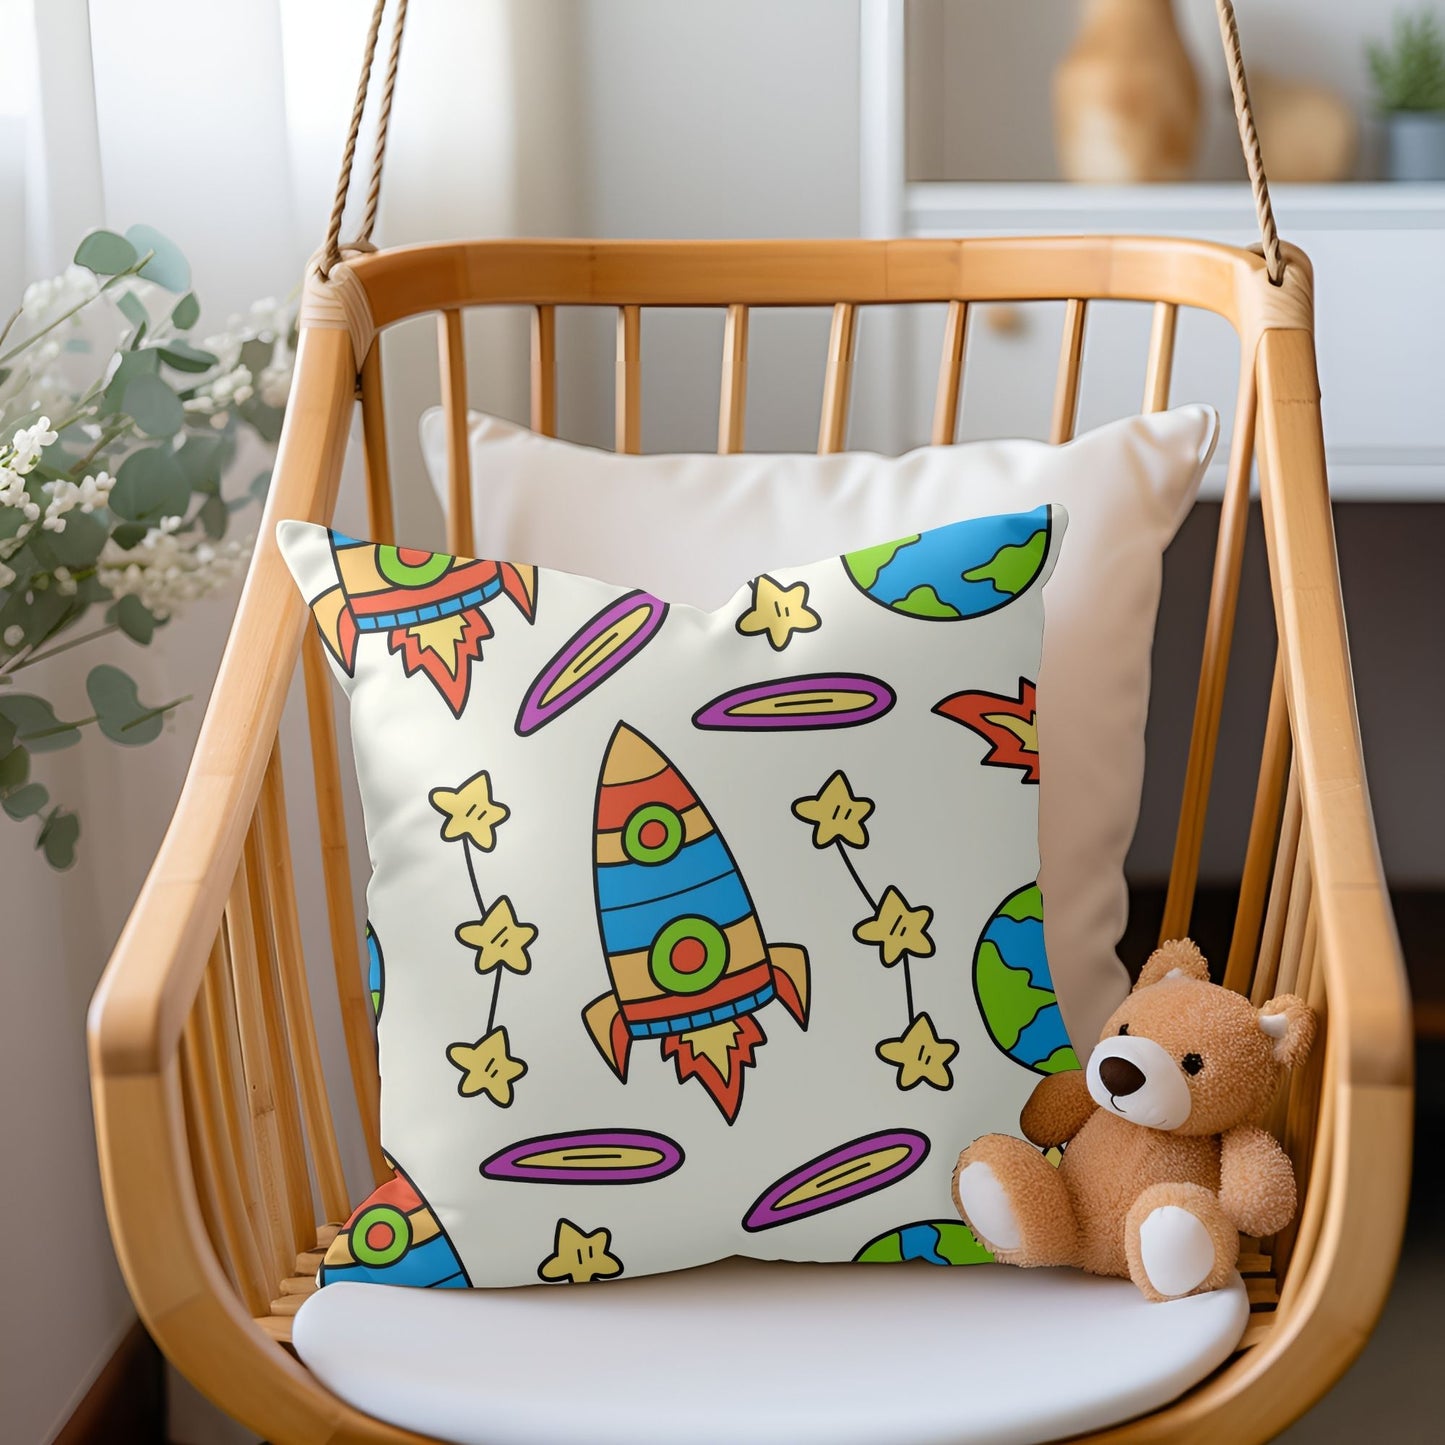 Adorable rocket ship pillow for little astronauts-in-training.